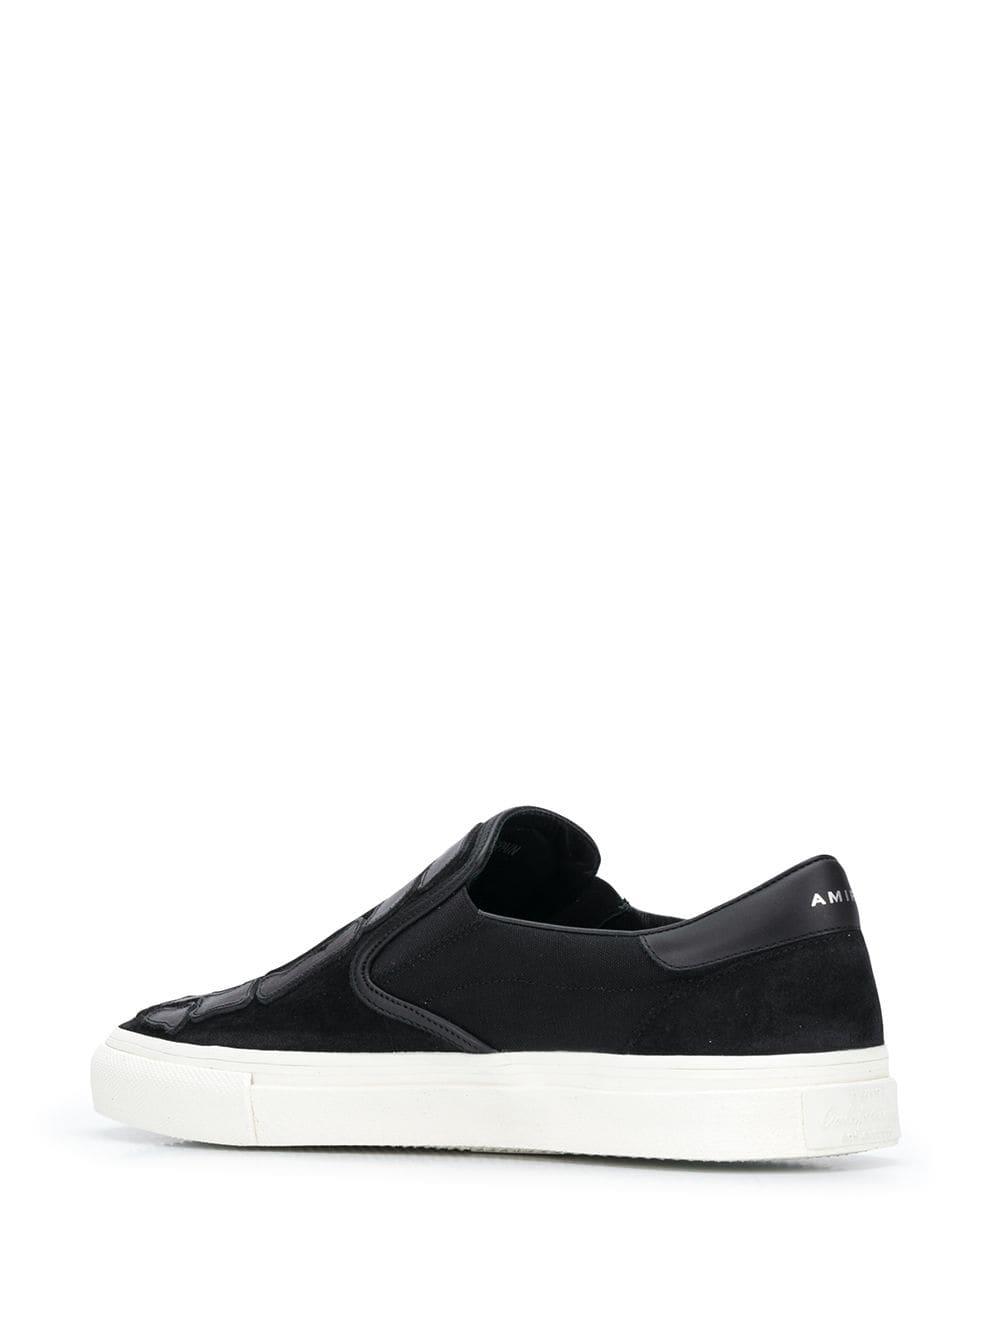 Amiri Leather & Suede Slip-on Sneakers in Black for Men - Save 6% - Lyst